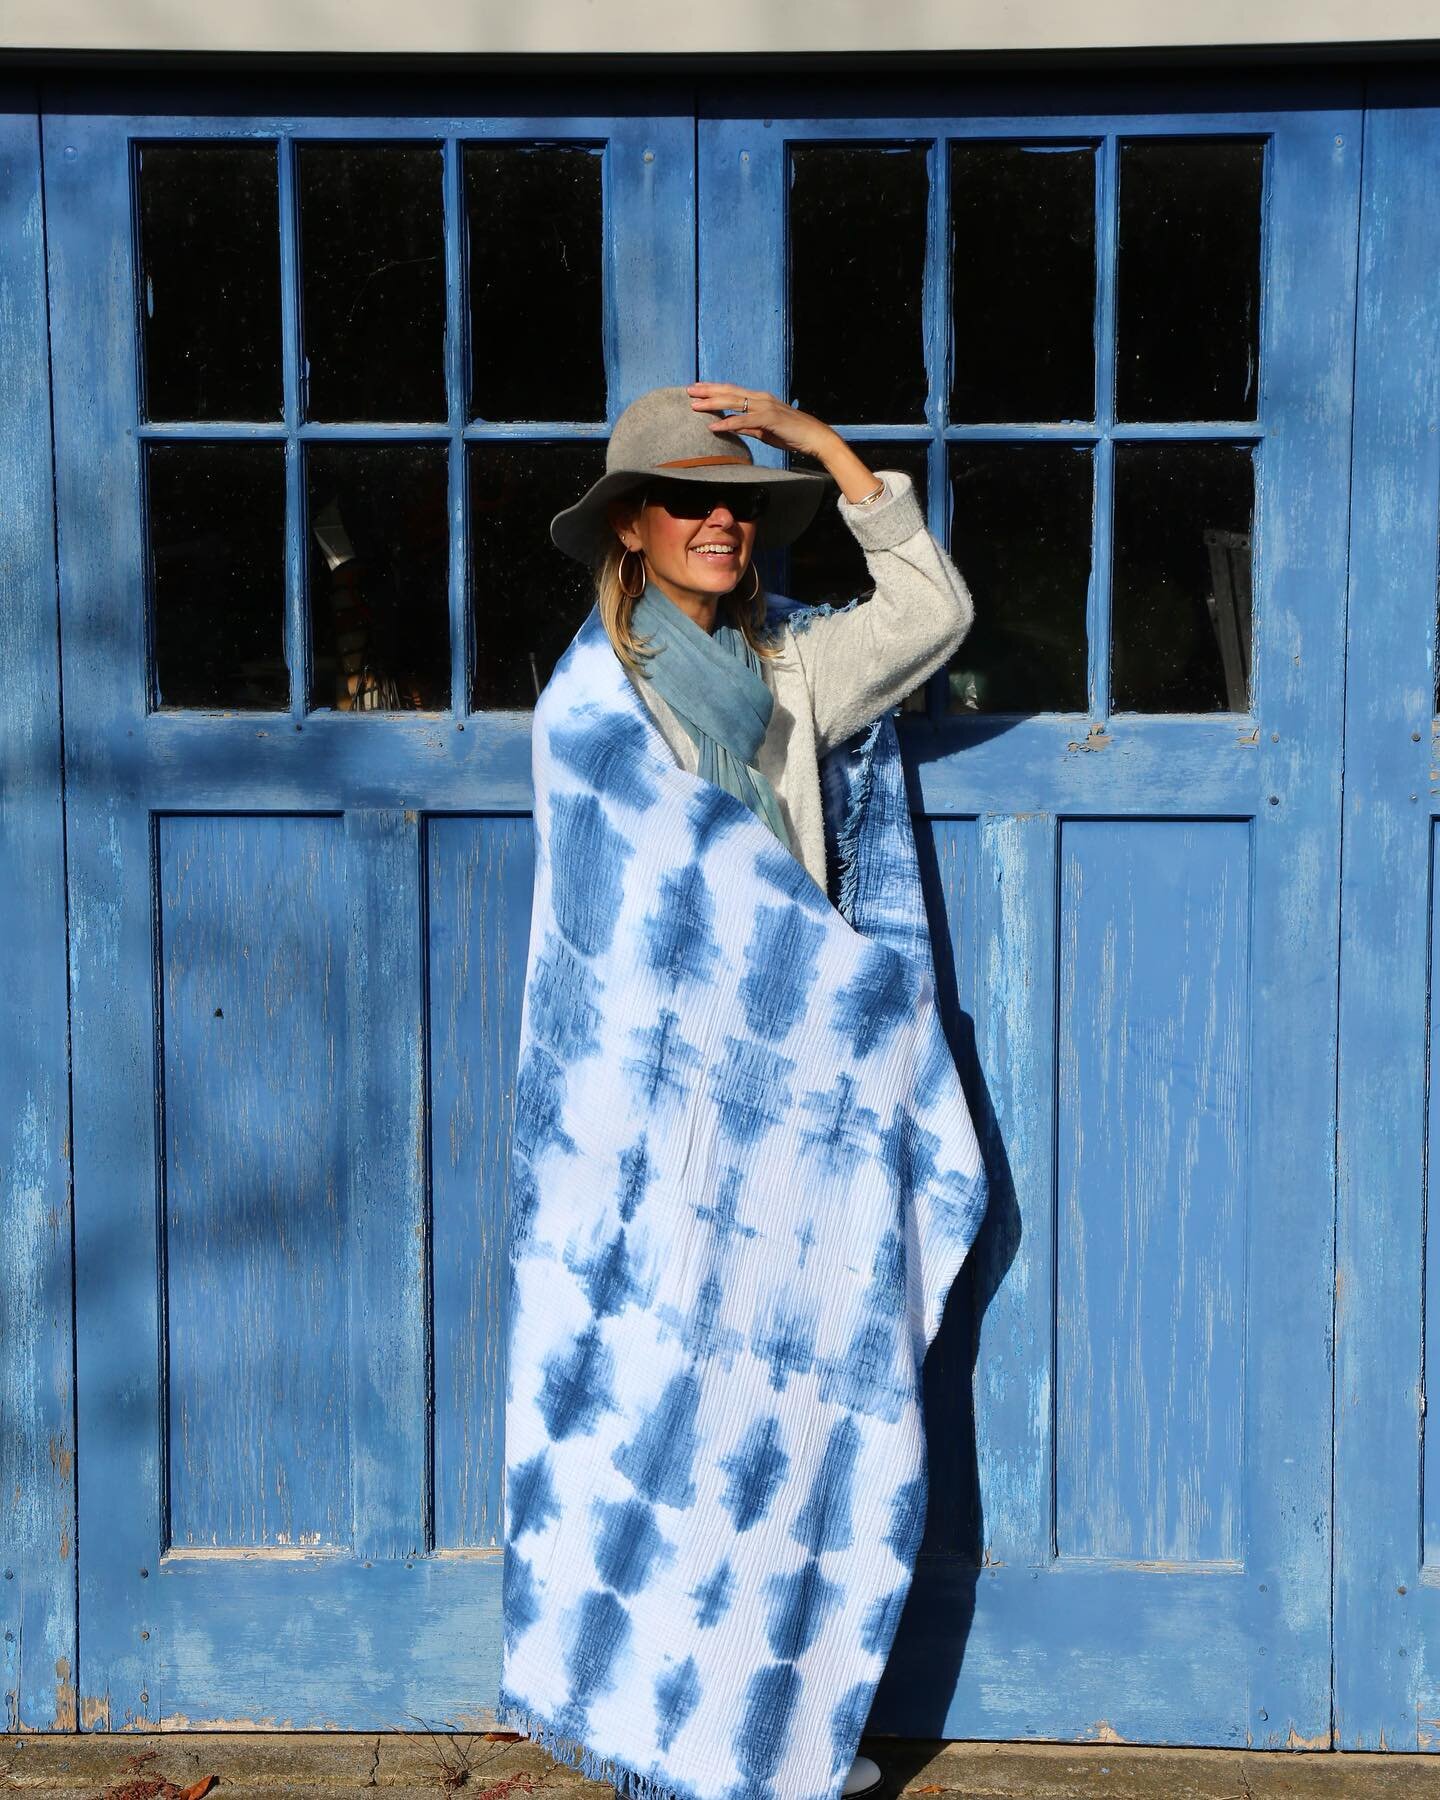 🌟 Indigo Sale 🌟 Every Season of the Year is a Beautiful time to Shop for Indigo 💙 
Seaside Throw Blanket along with all other Indigo Hand dyed items are on Sale this week ! #shopsmall #shoplocal #indigo #indigoshibori #nantucketblues #classicbluea